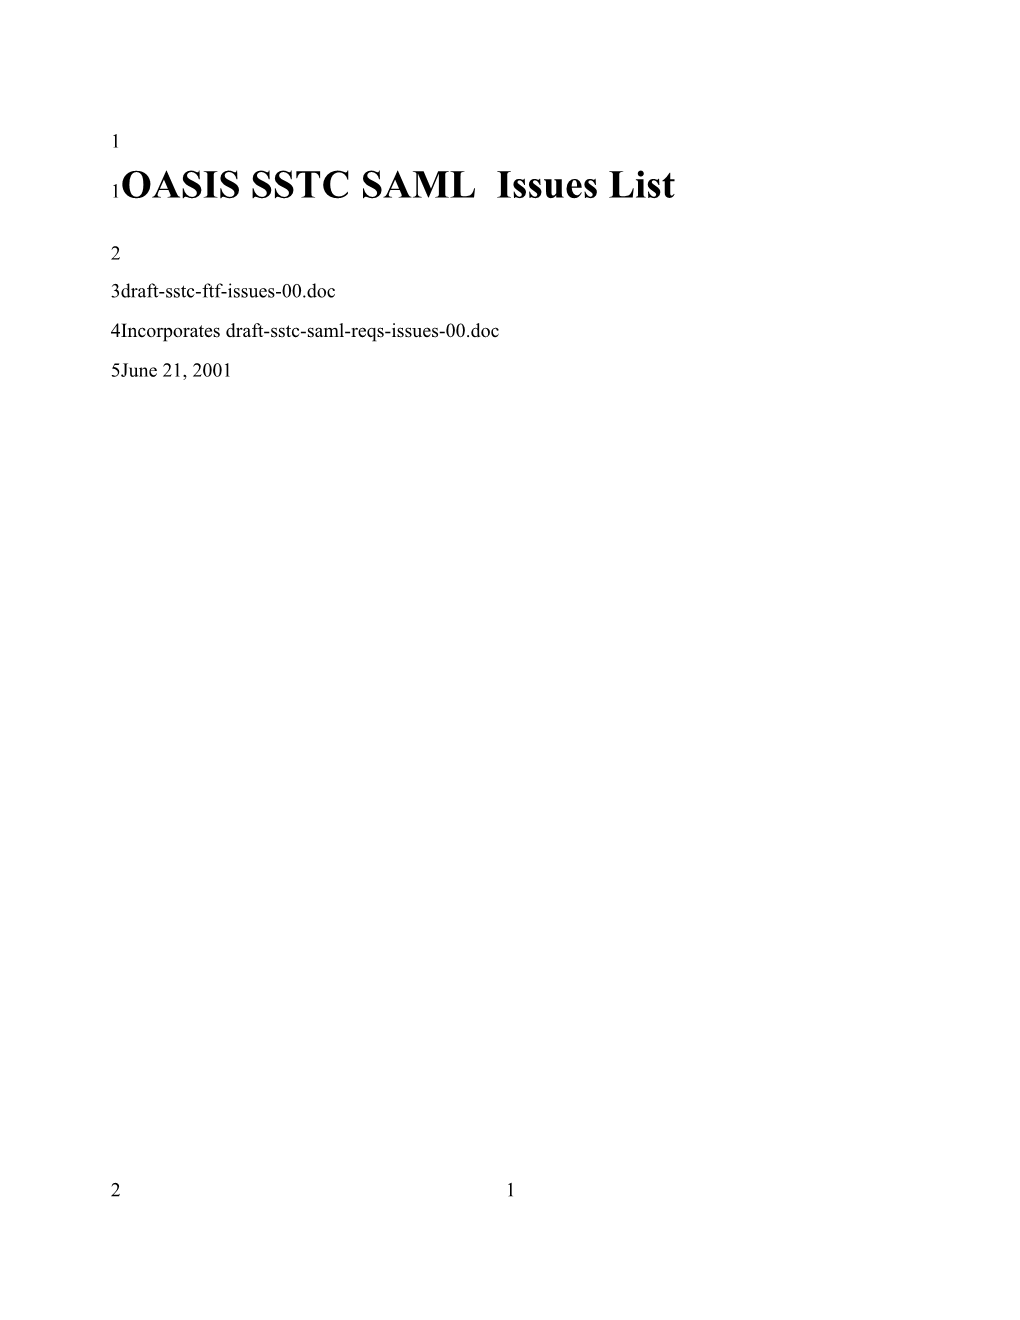 Oasis Security Services Use Cases and Requirements: Issues List